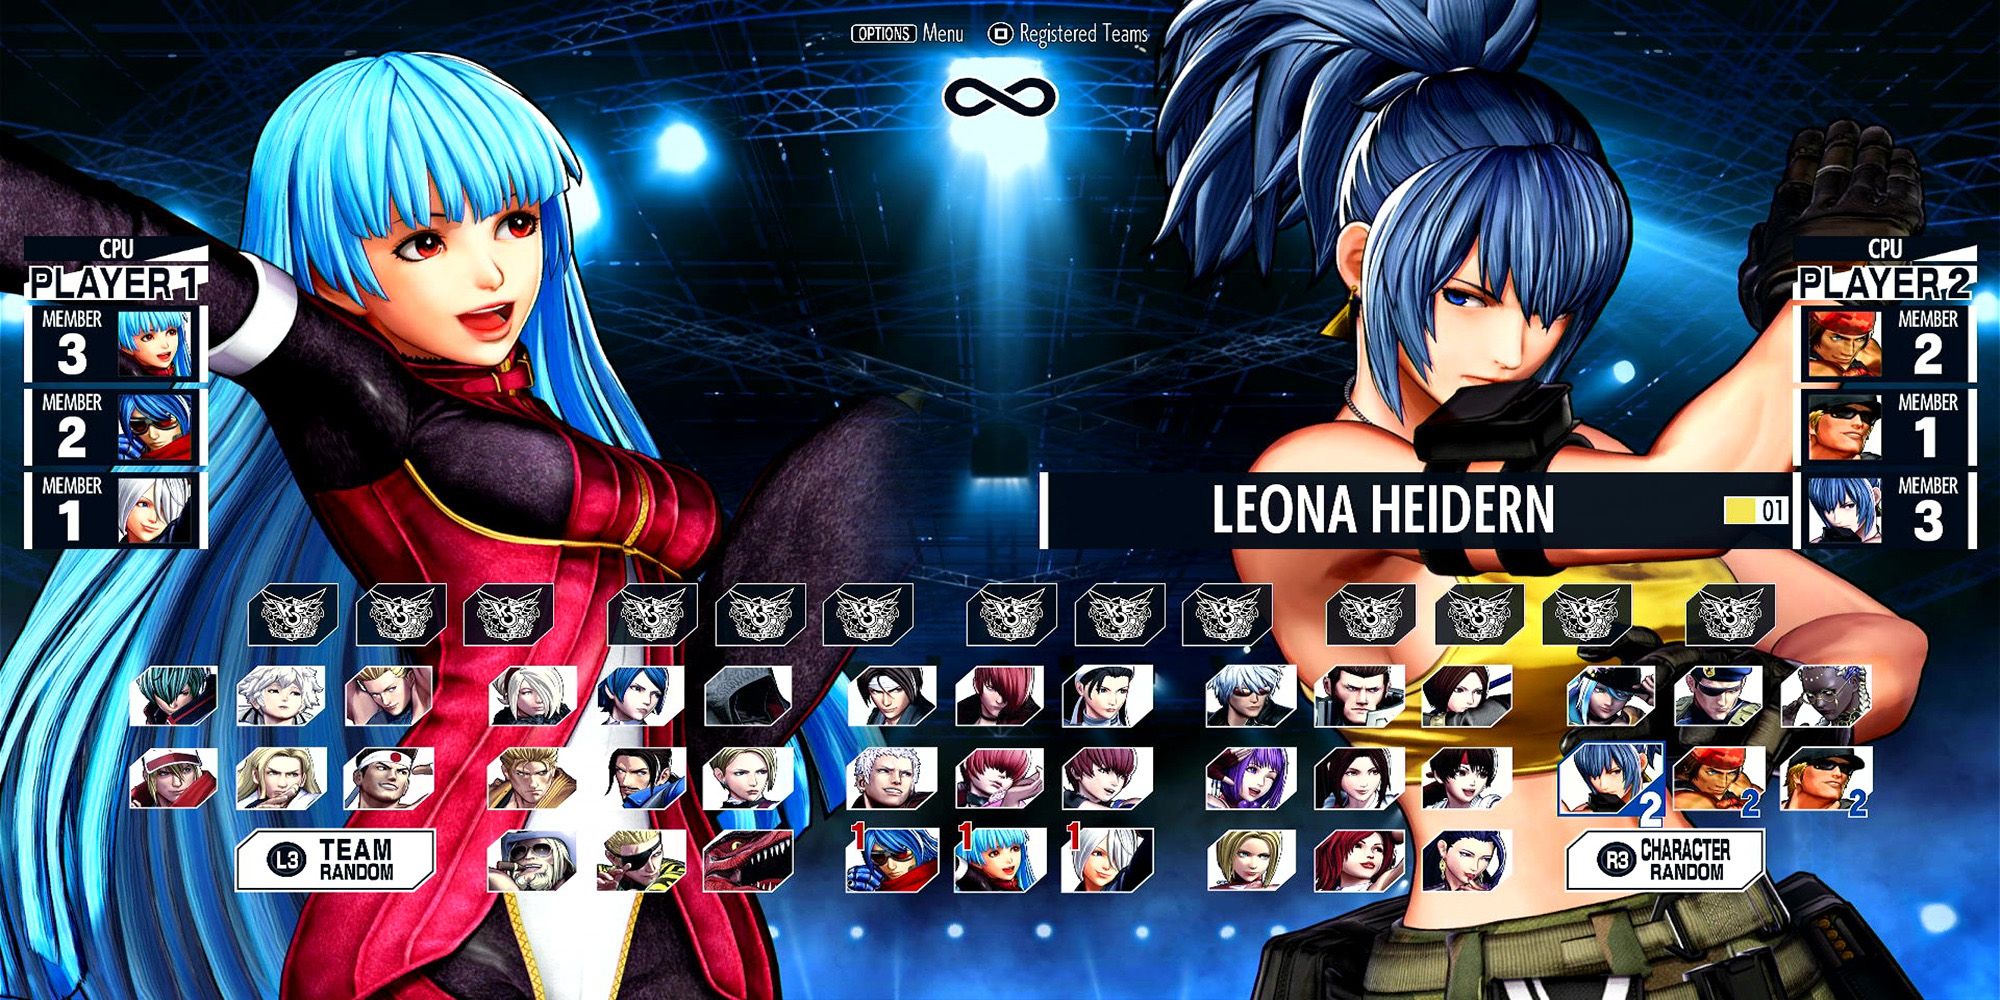 Player 1 selects Team Krohnen and Player 2 selects Team Ikari in the character select menu in The King Of Fighters 15. Kula Diamond and Leona Heidern are featured.